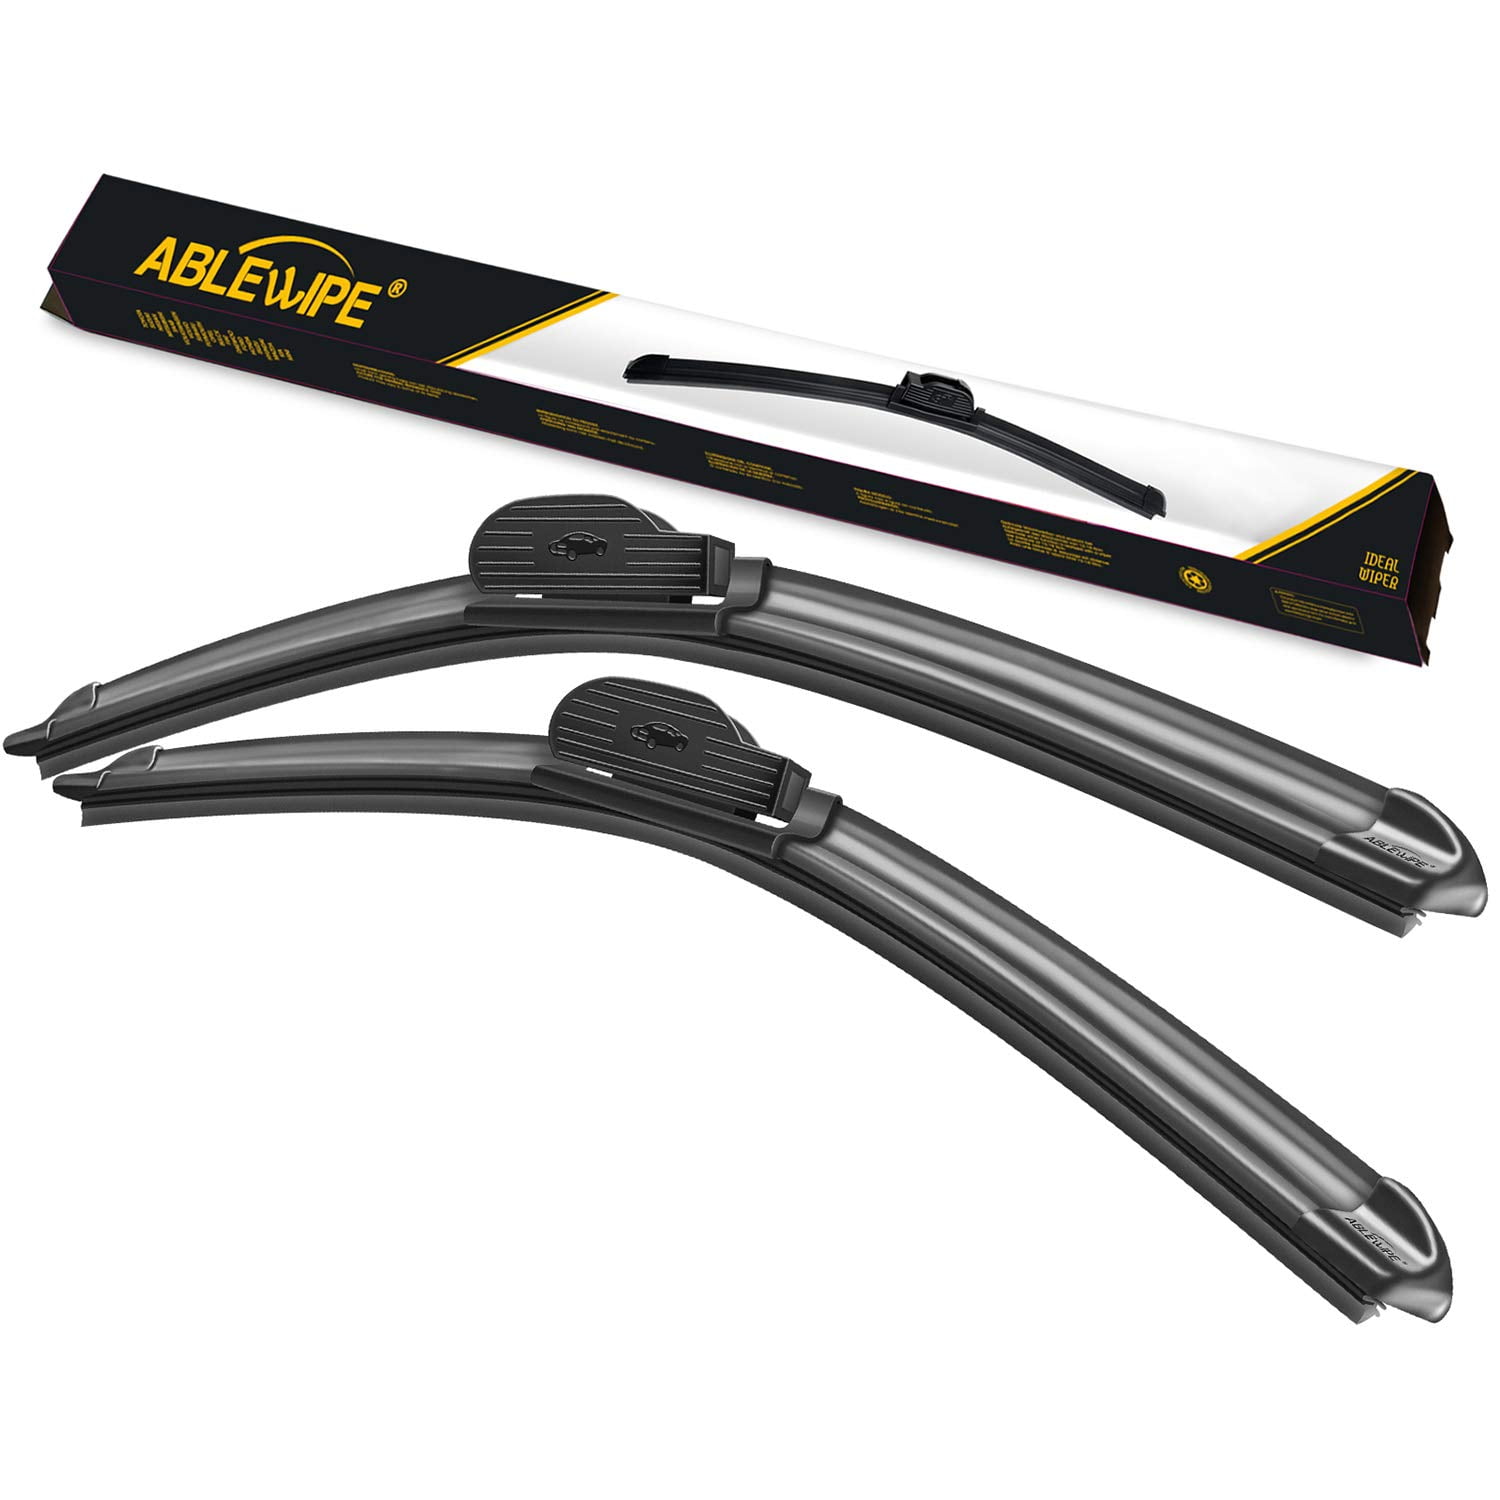 ABLEWIPE 18&19 Windshield Wiper Blades Fit For MINI Cooper 2009 18 Inch &  19 Inch Premium Hybrid replacement for car front window wiper (Pack of 2),  NO3331A 